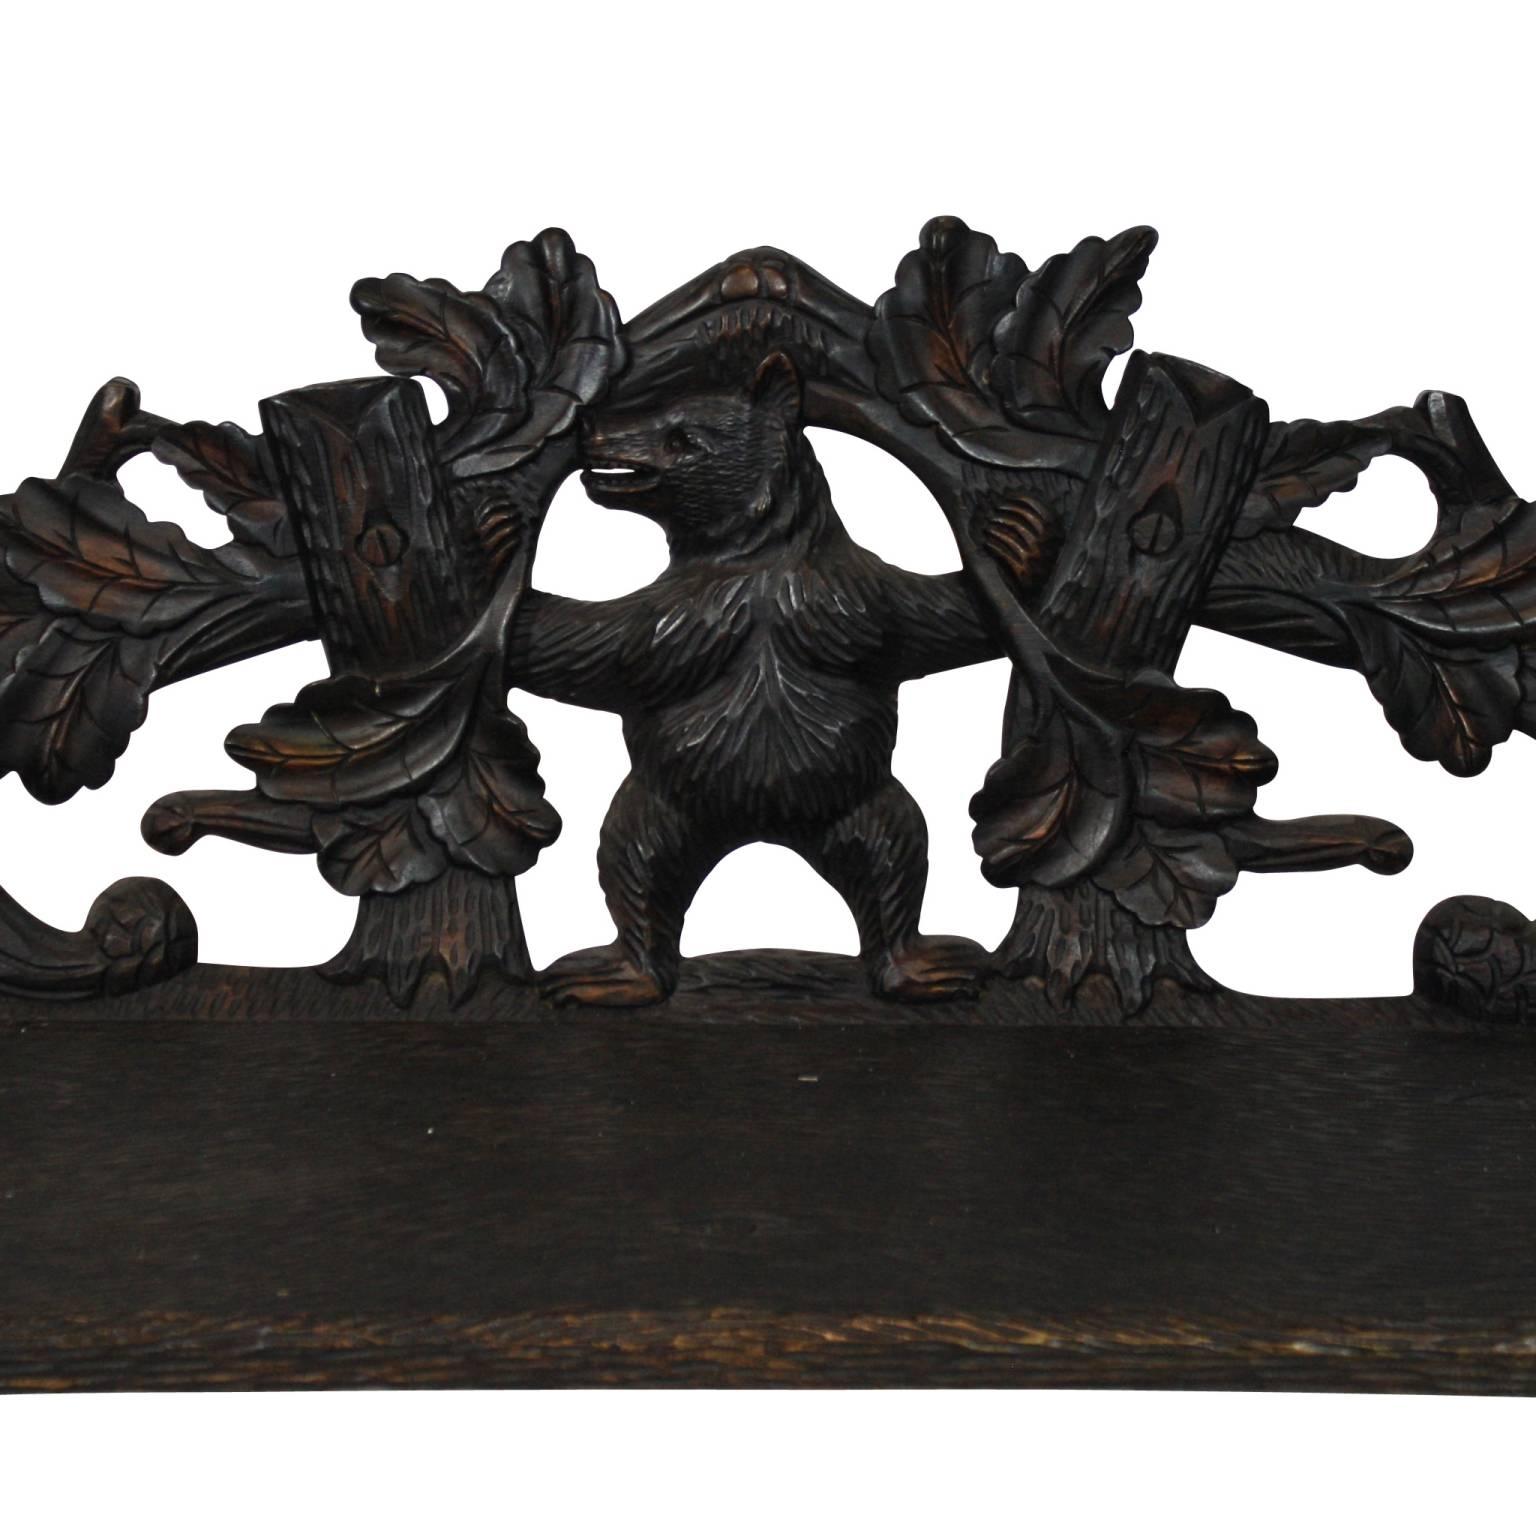 Swiss Black Forest bench, featuring two carved bears holding up a carved seat and back.